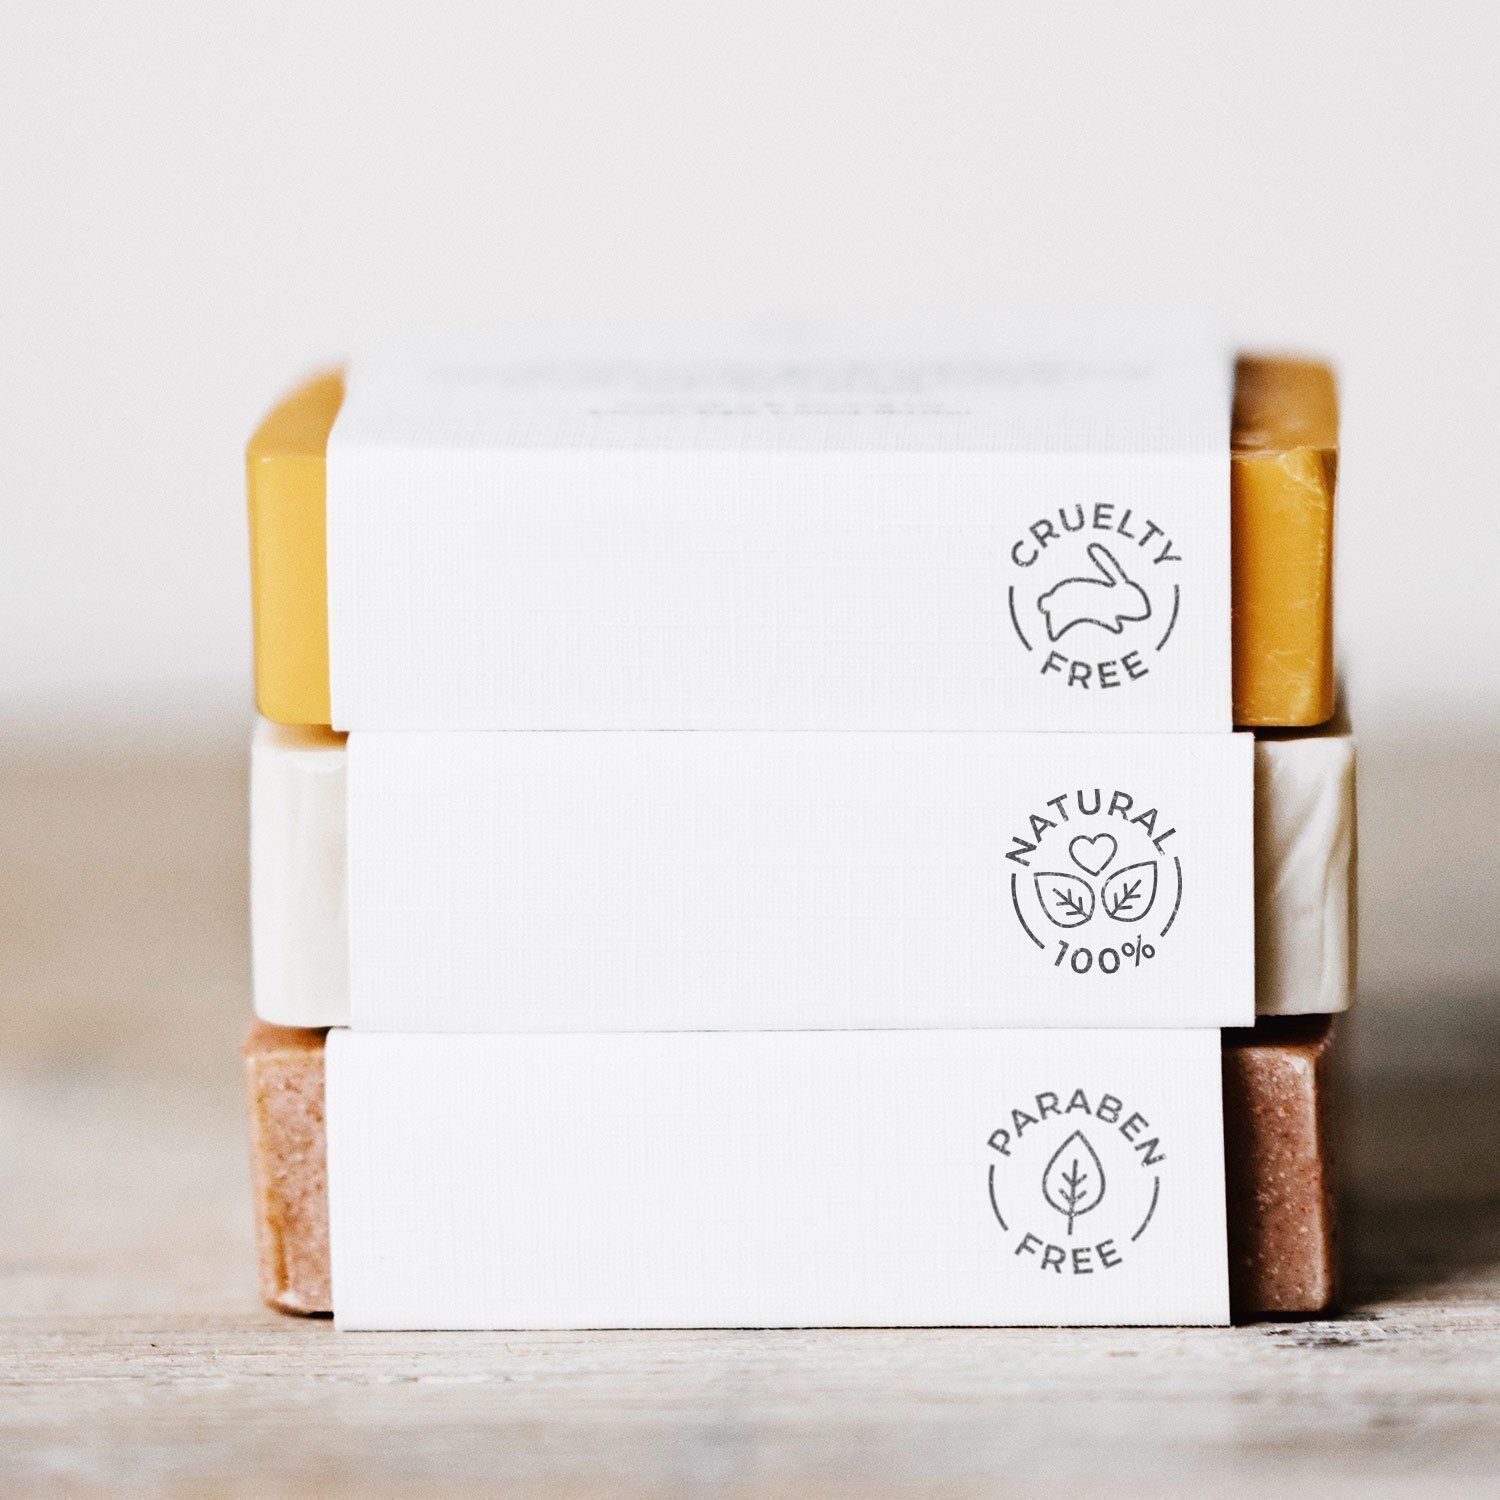 natural beauty icon stamps, natural cosmetic icon stamp for organic brand packages, cruelty free stamp, organic beauty packaging icon stamp - natural beauty icon stamps, natural cosmetic icon stamp for organic brand packages, cruelty free stamp, organic beauty packaging icon stamp -   13 beauty Icon free ideas